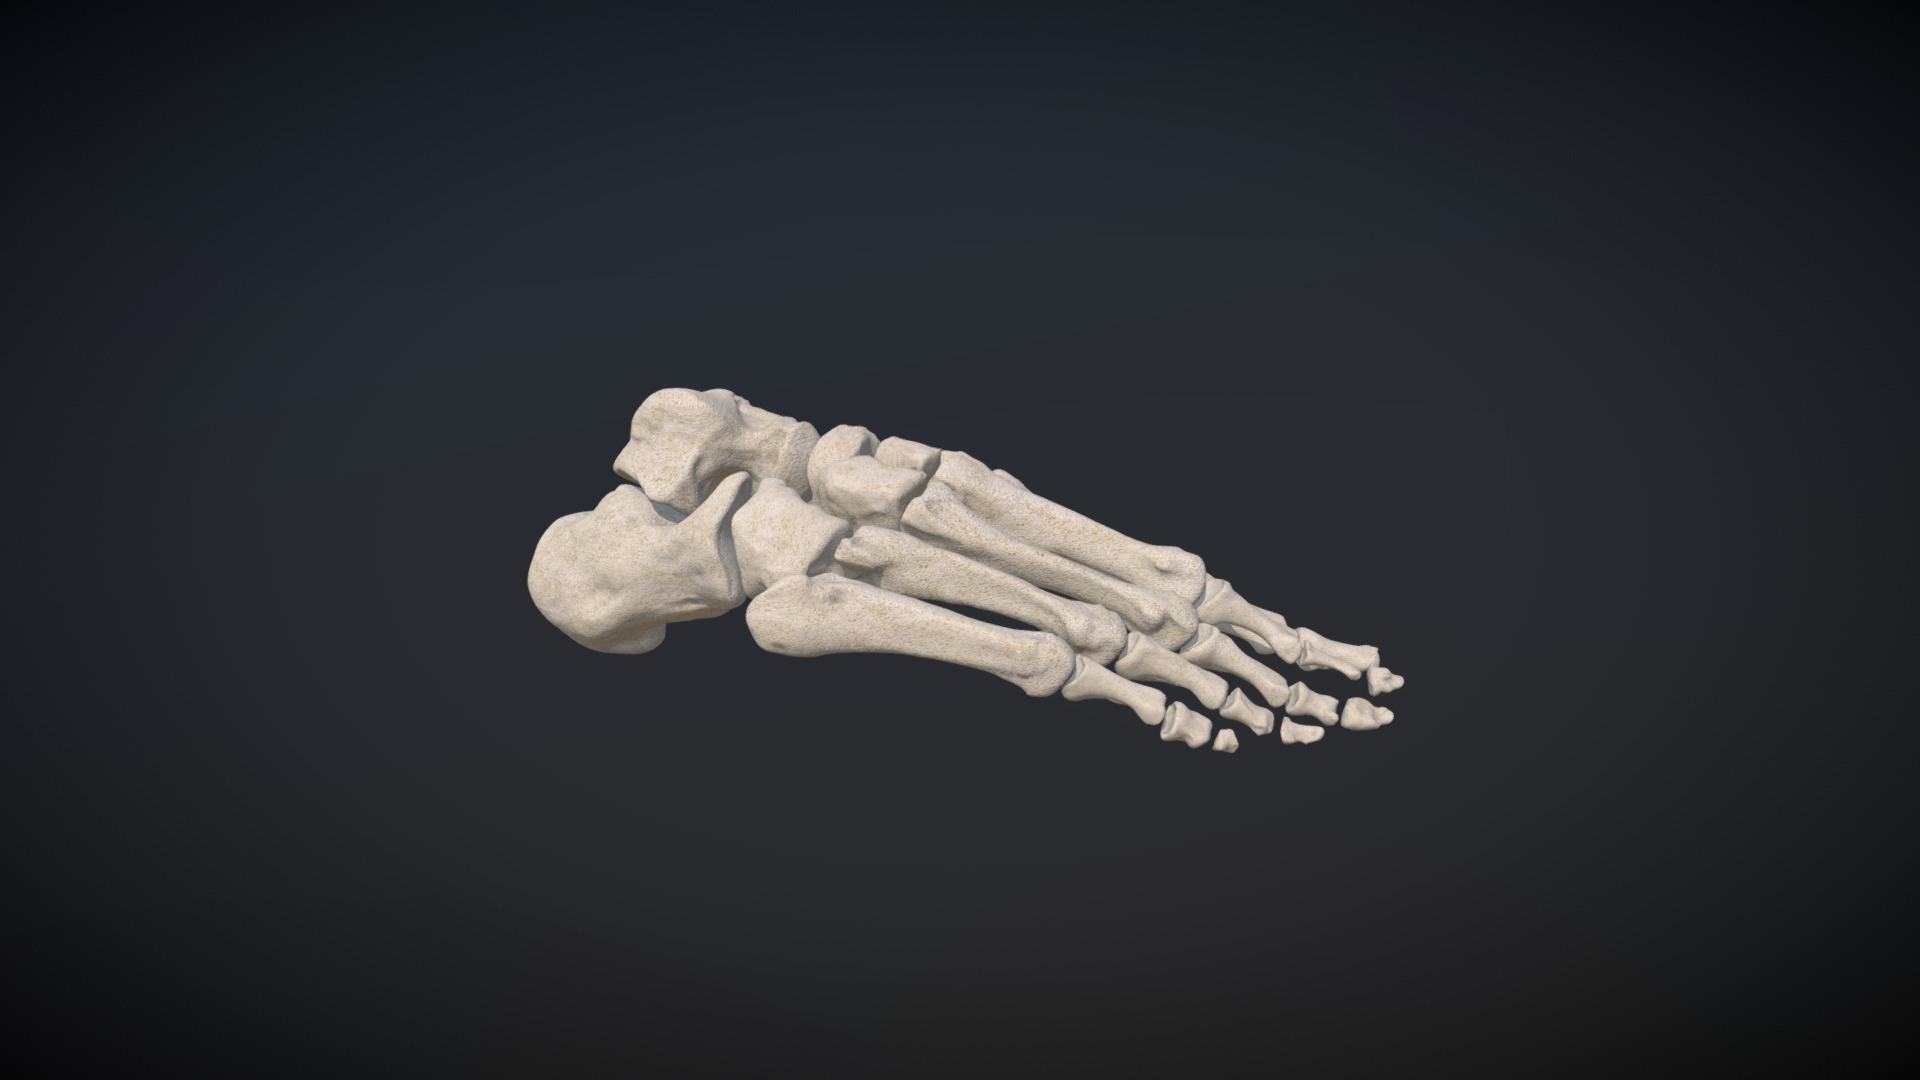 3D model Foot bones / Huesos del Pie - This is a 3D model of the Foot bones / Huesos del Pie. The 3D model is about a close-up of a human hand.